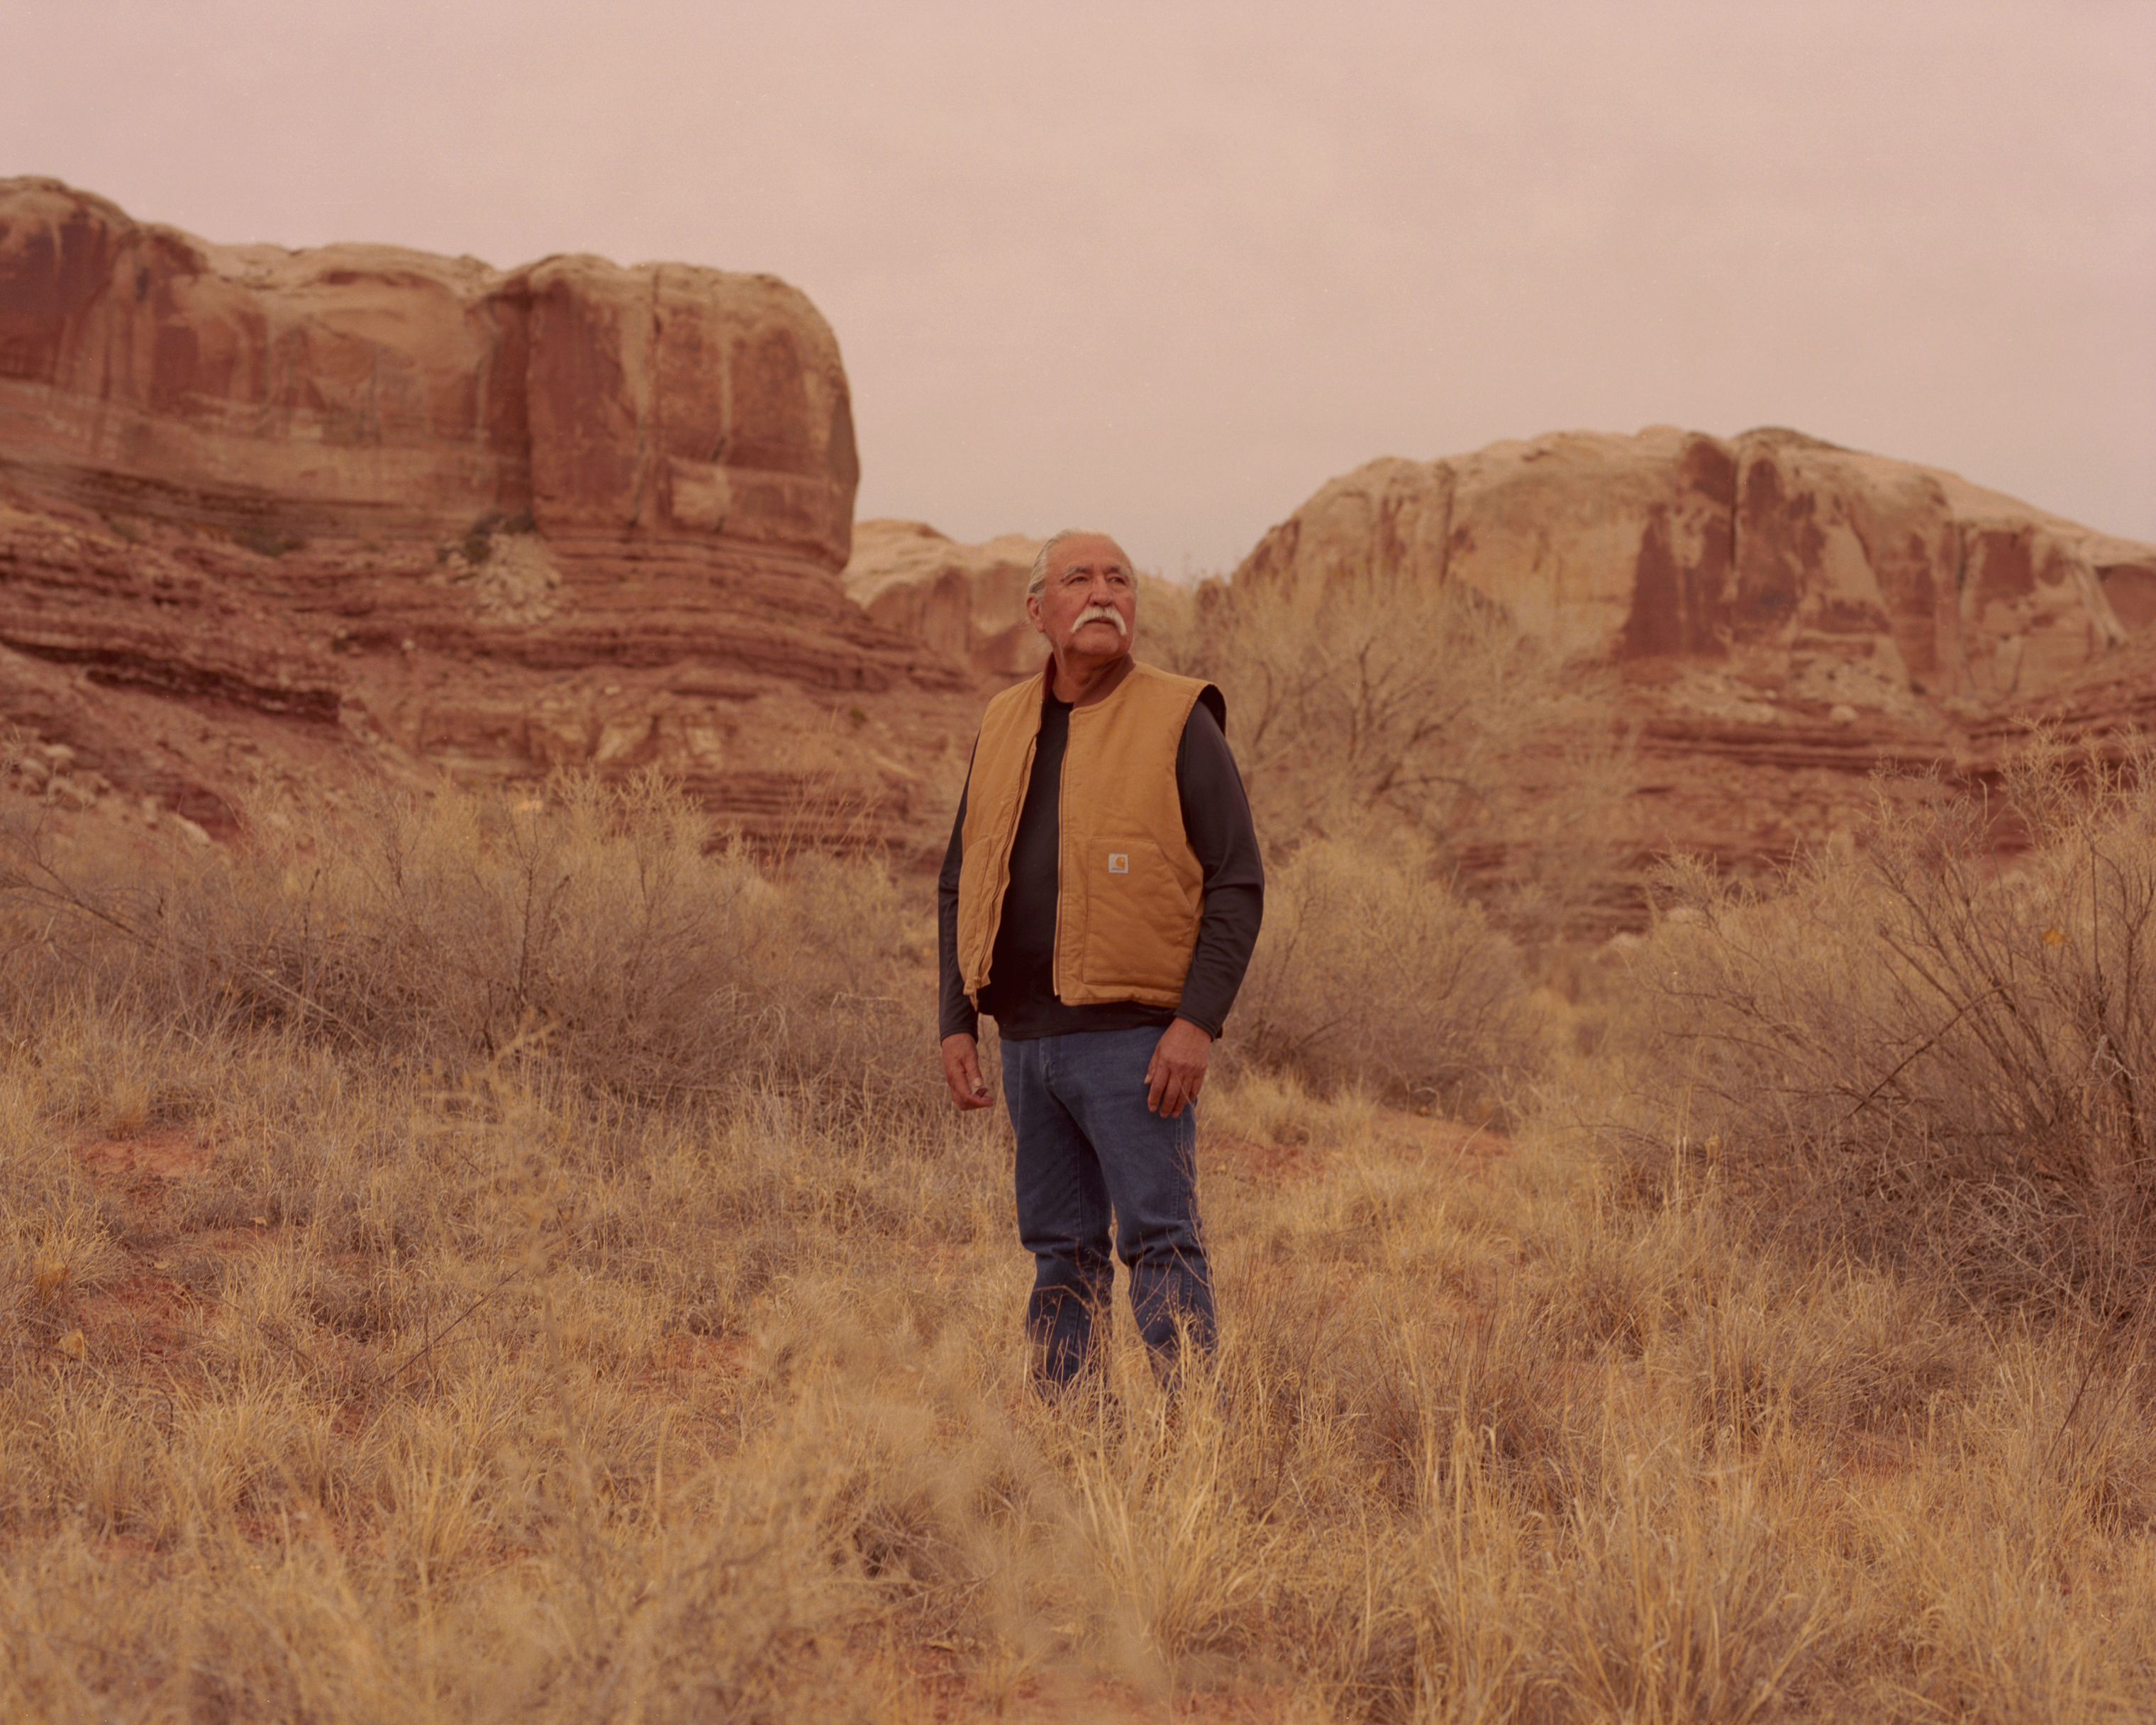 Willie Grayeyes is pictured in Bluff, Utah, one of the towns in Southeastern Utah where residents have been divided in their support of the monument. Grayeyes works with the Bears Ears Commission, a coalition of five tribes that was formed to help direct how the land in the national monument would be managed, according to plans laid out in the Obama proclamation. He has also been attempting to run for local office as a Democrat in San Juan County, where Bears Ears is located. The Republican-controlled commission has opposed the monument and officials have been seeking to prove that Grayeyes is not eligible to run. A new set of commissioners more sympathetic to tribes could work to support the monument. As it stands, the county has requested to join the Bears Ears lawsuit as a defendant, alongside President Trump. (Ryan Shorosky for TIME)